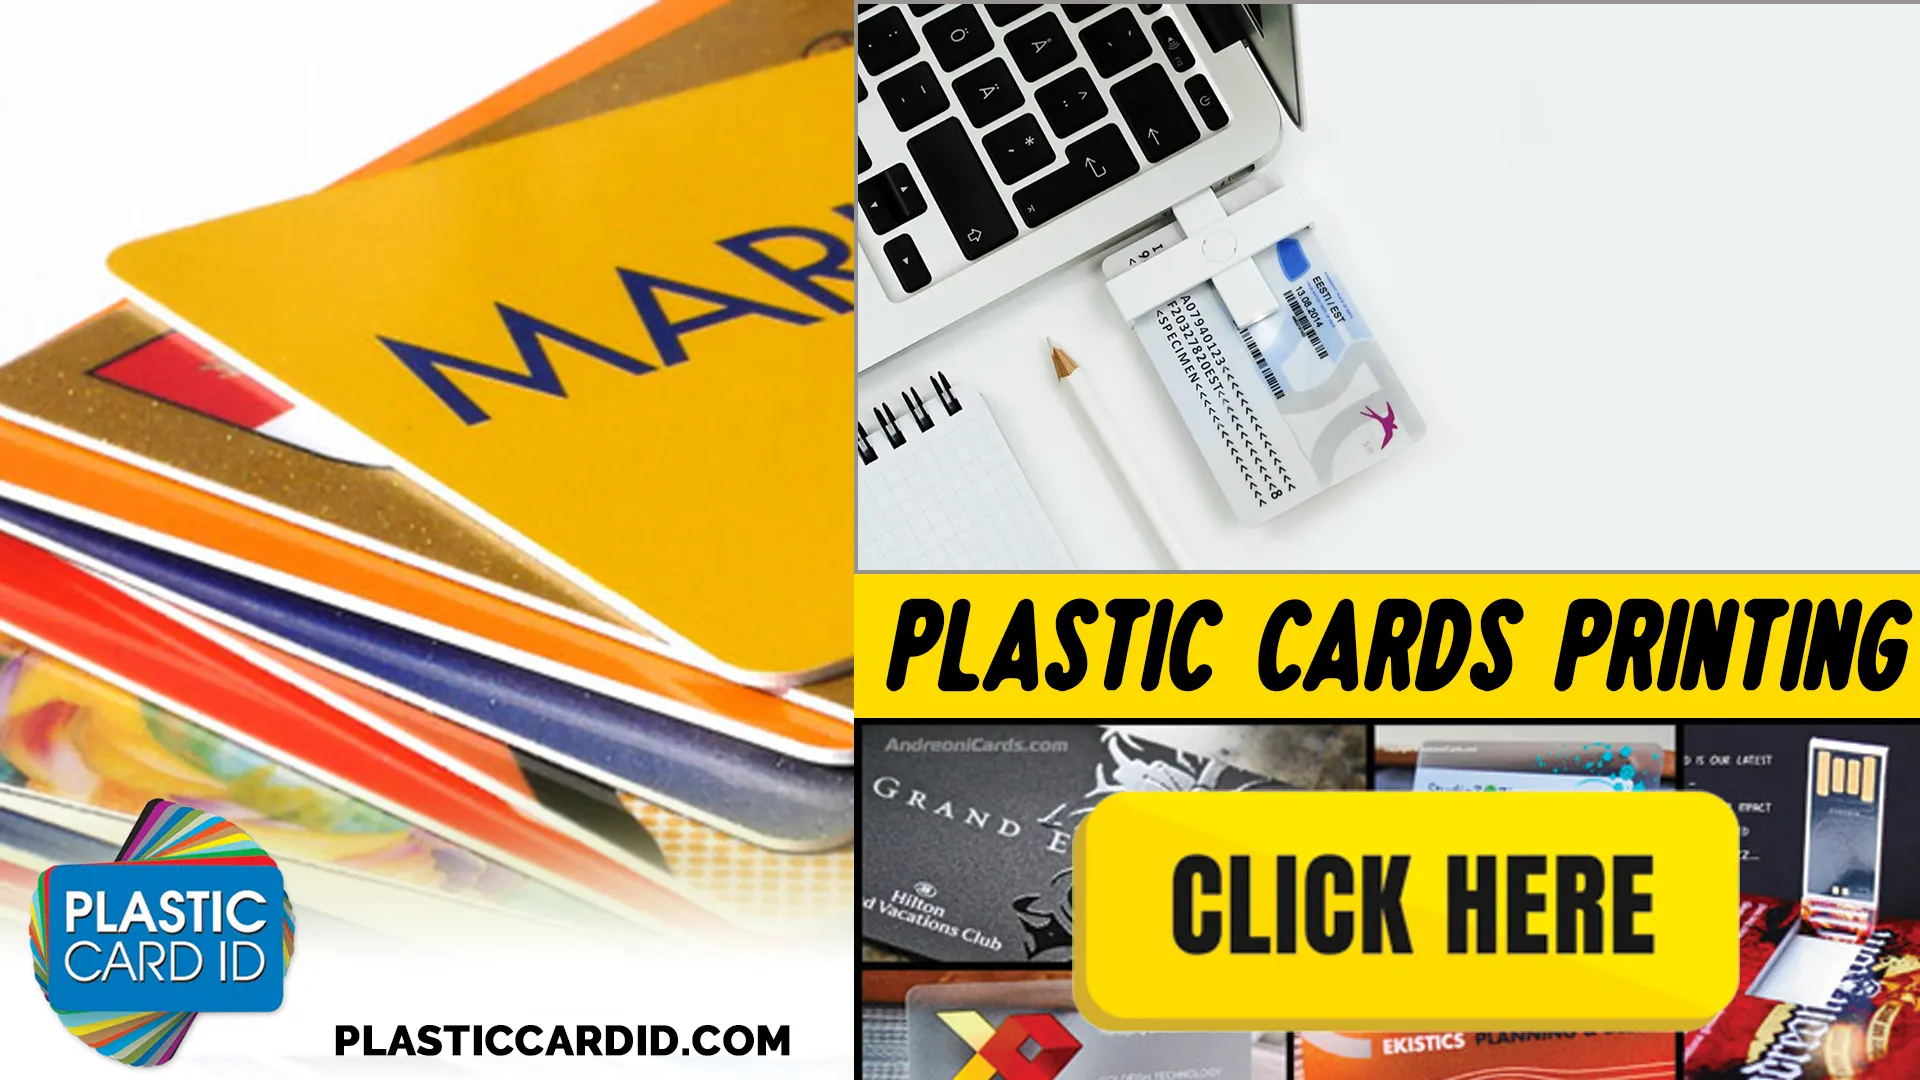 Card Printer Cleaning Kits: The Unsung Heroes